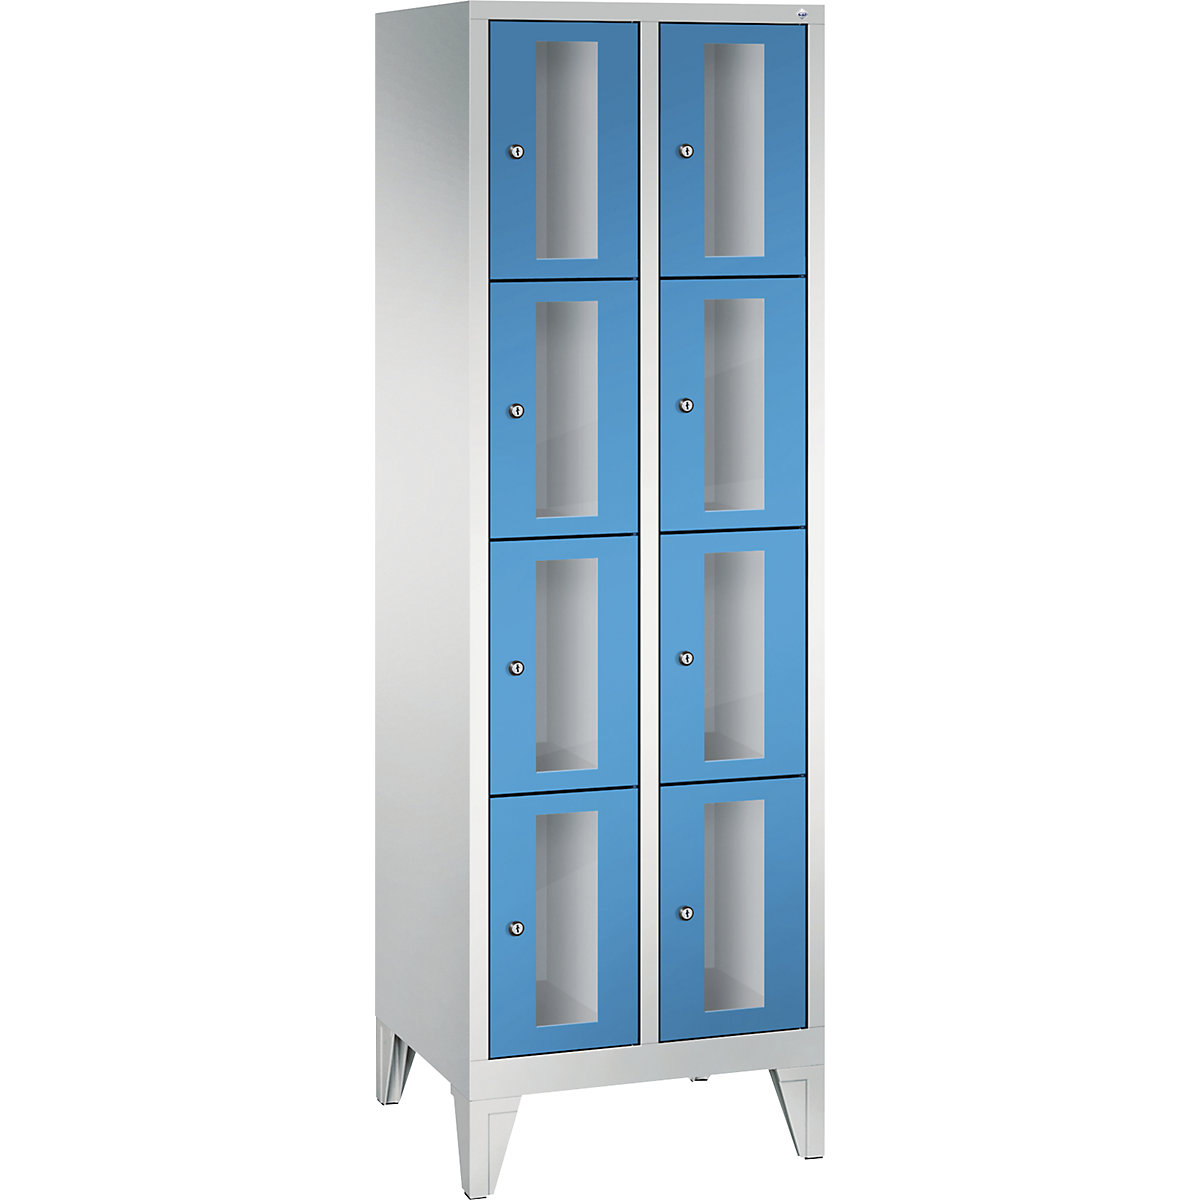 C+P – CLASSIC locker unit, compartment height 375 mm, with feet, 8 compartments, width 610 mm, light blue door